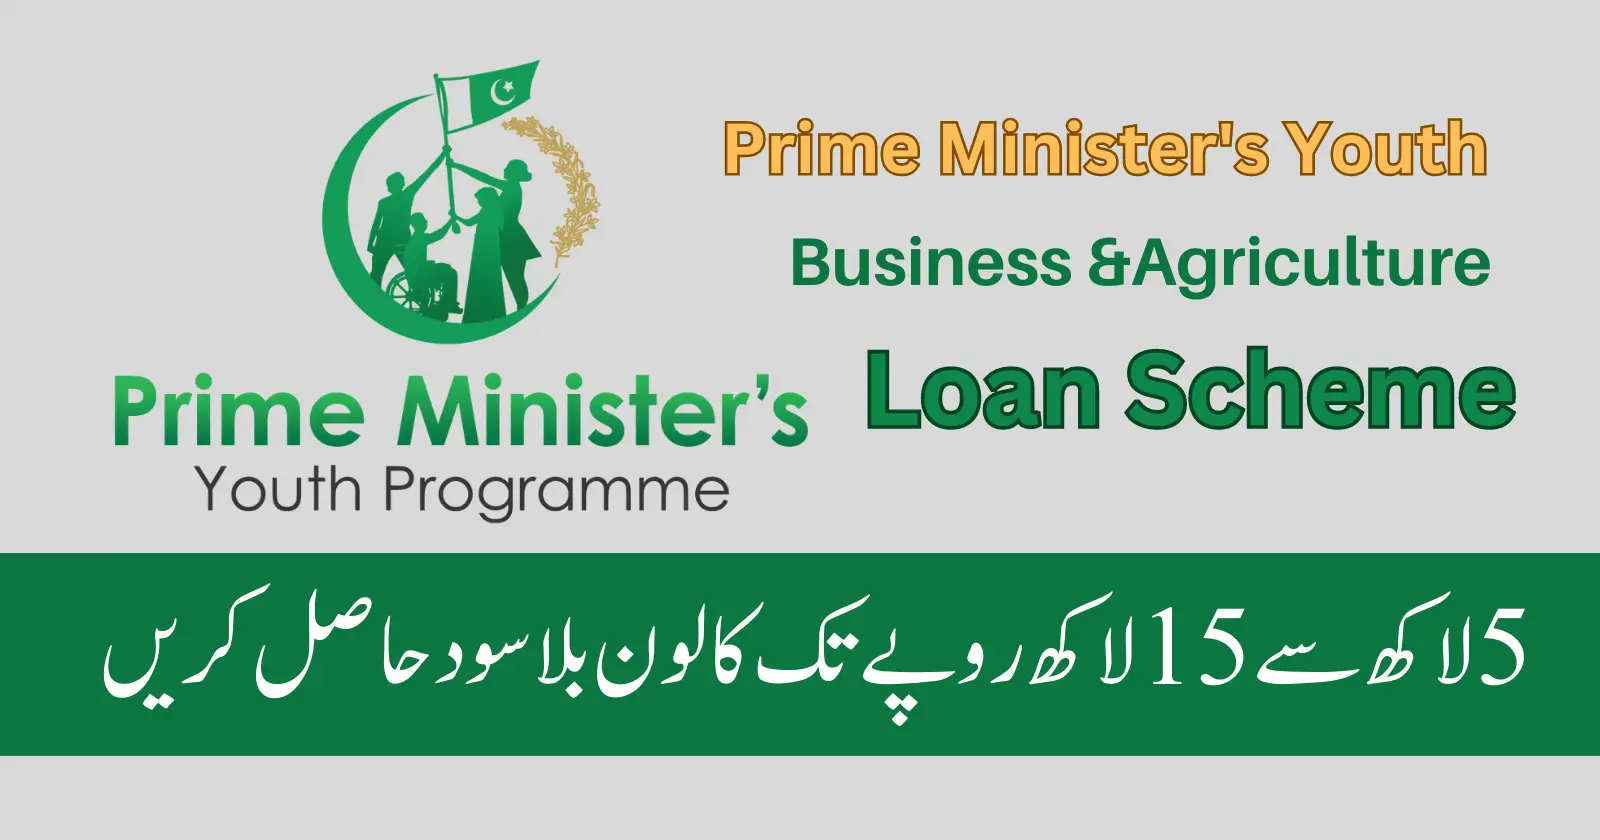 Prime Minister's Youth Business & Agriculture Loan Scheme